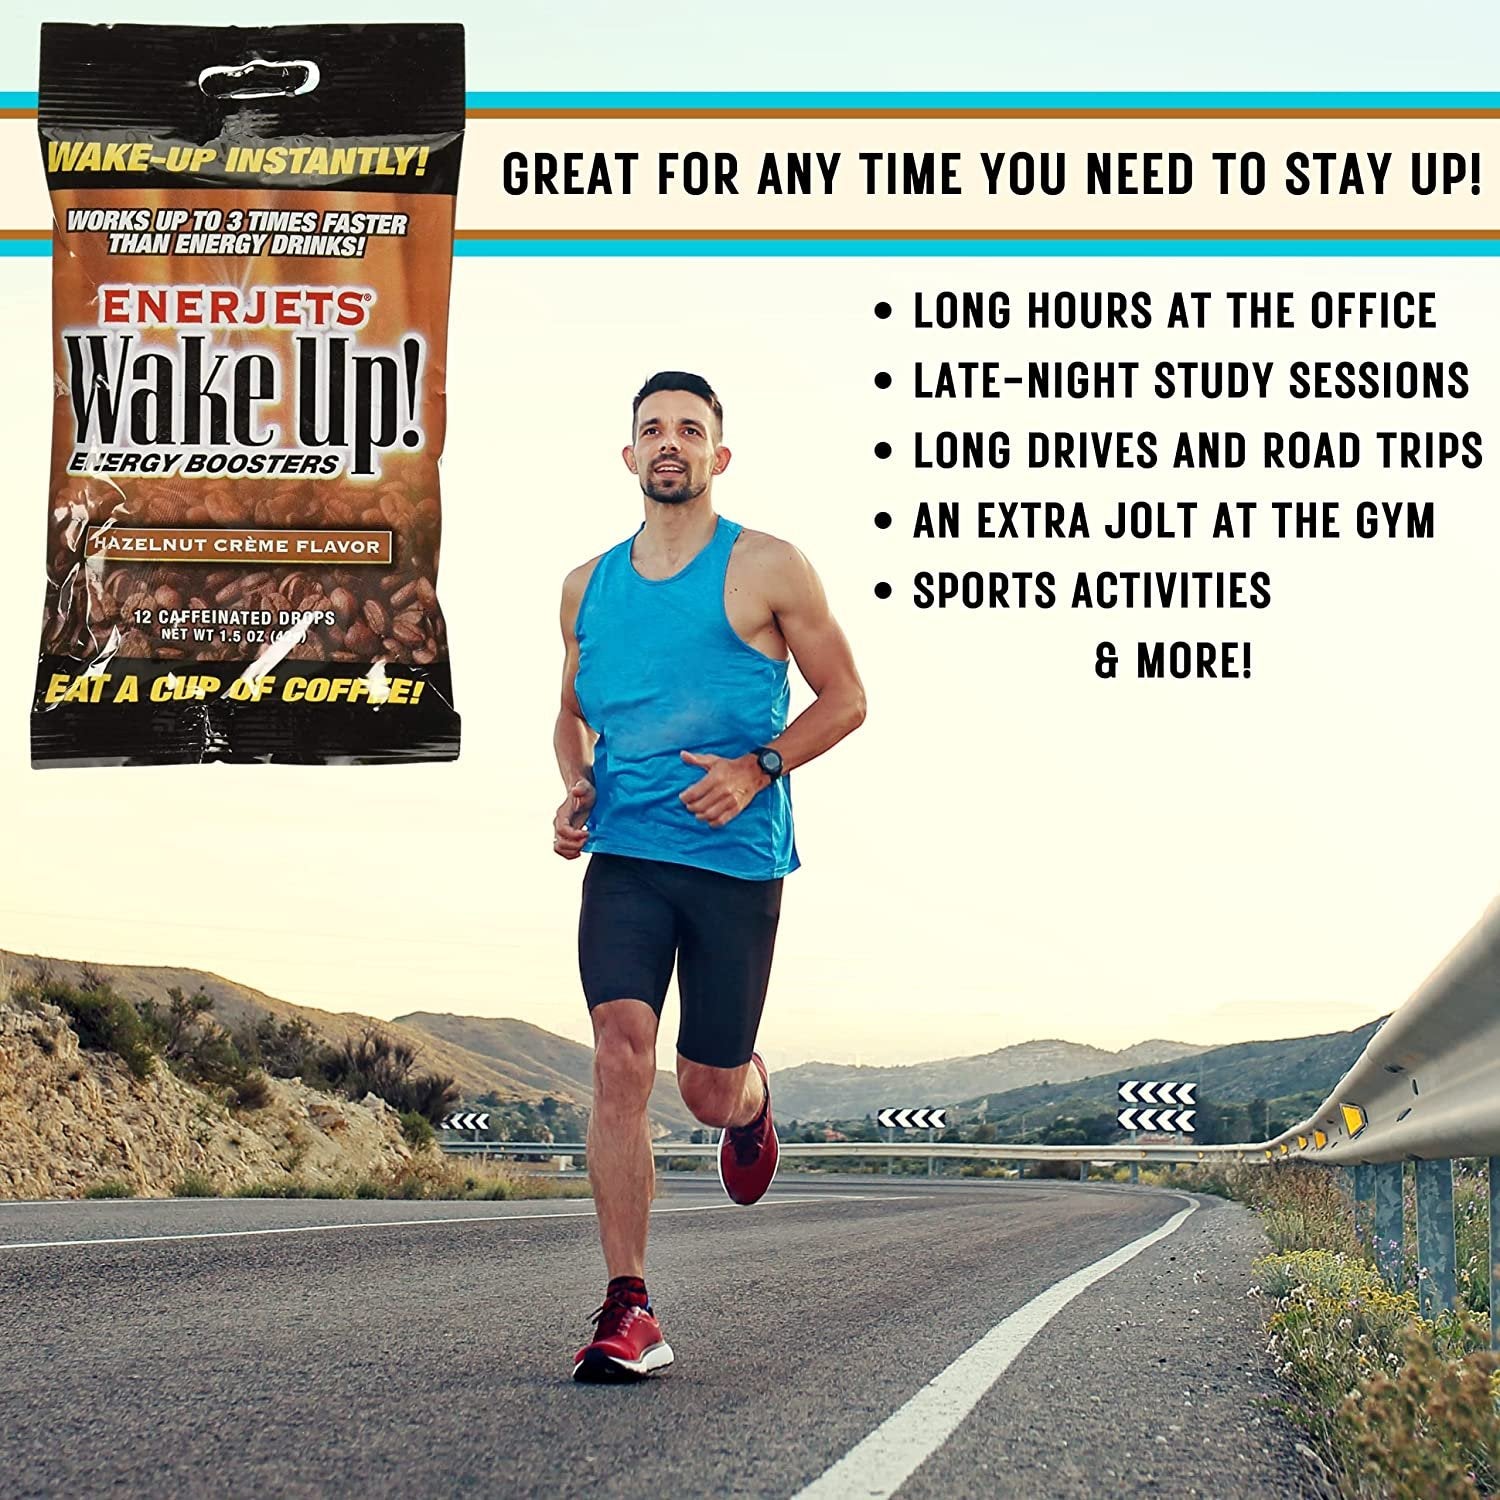 Enerjets Wake Up Energy Booster Caffeinated Drops - Instant Coffee Energy Supplements - Hazelnut Creme Flavor - Pack of 12, 12 Drops Per Package with Worldwide Nutrition Multi Purpose Key Chain